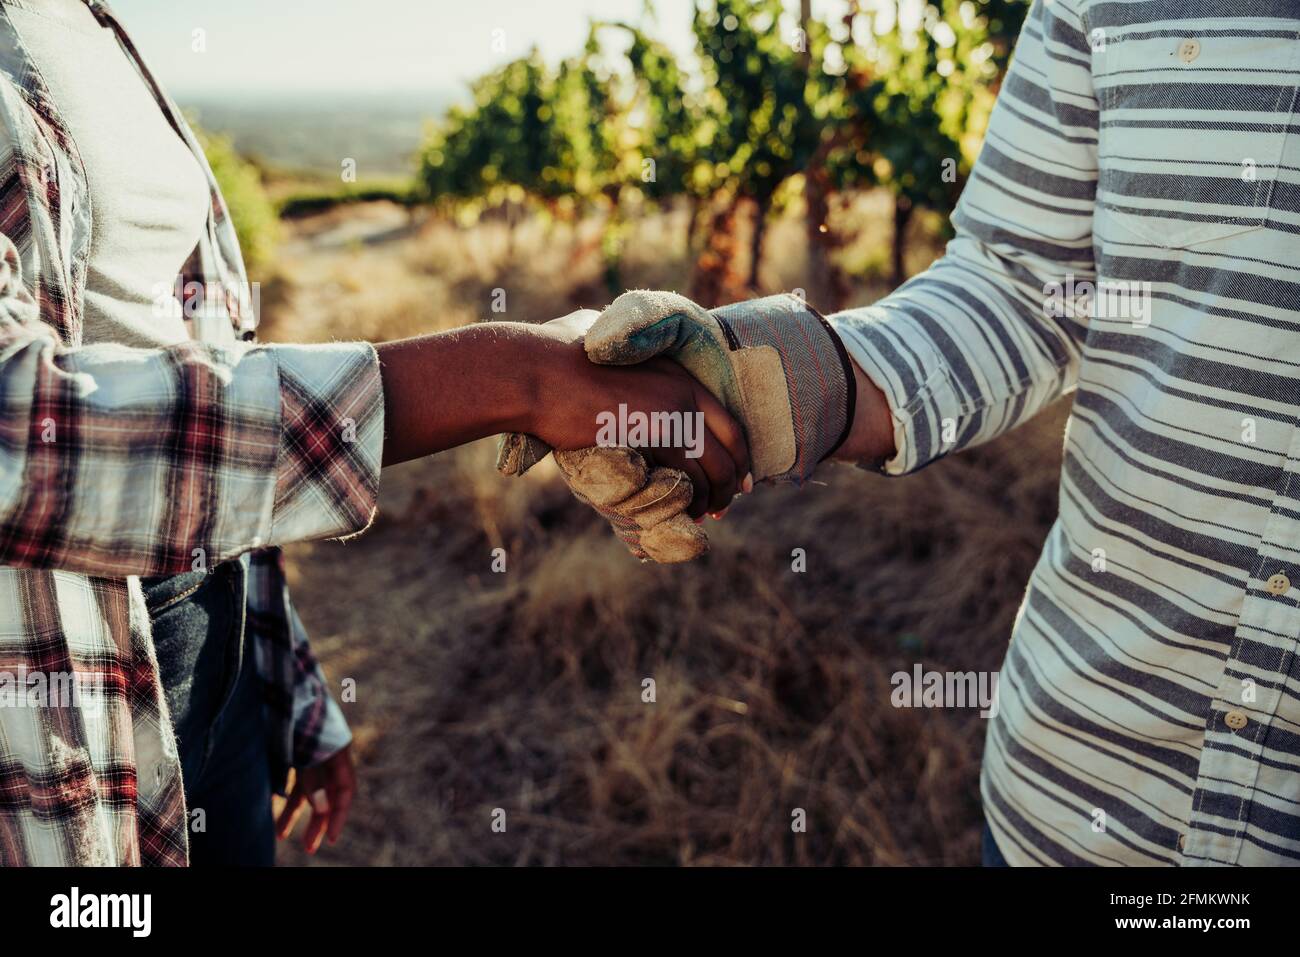 Mixed race make and female colleague shaking hands after successful harvest  Stock Photo